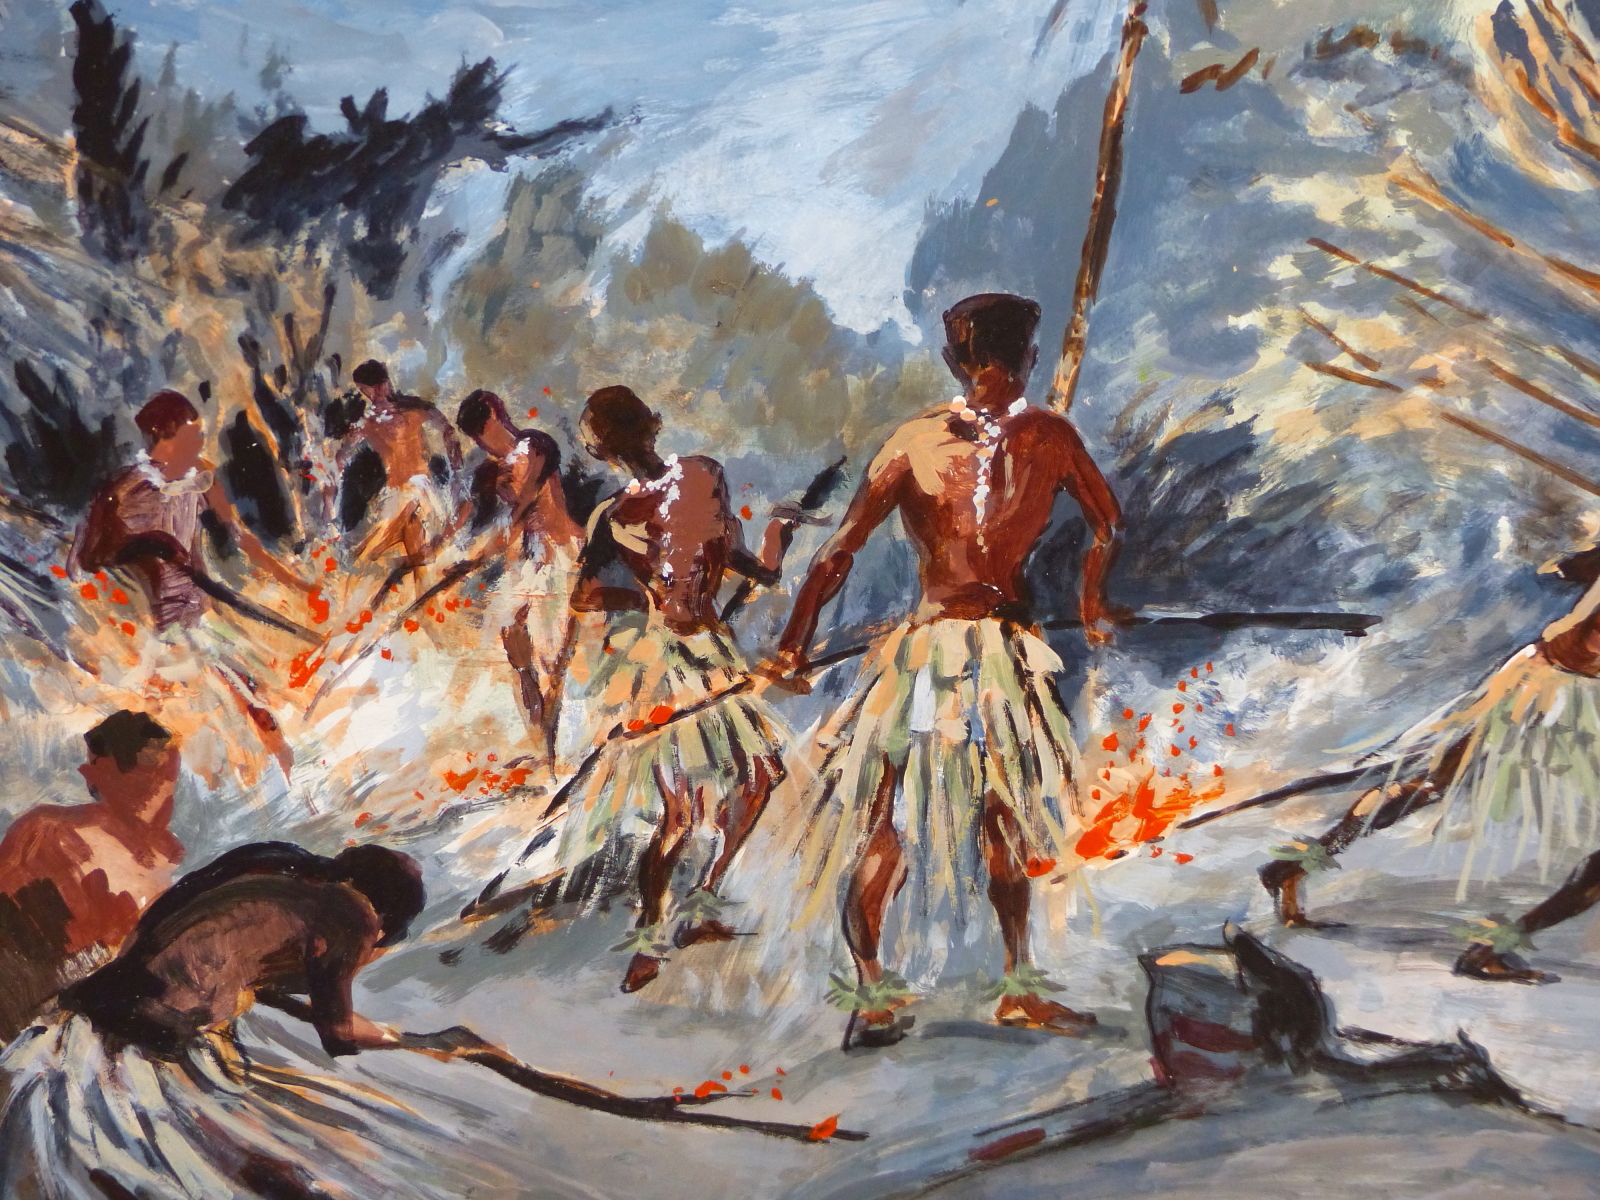 IVY ATWELL (20th CENTURY) BRITISH, PREPARING FOR FIRE WALKING, FIJI, AND FIVE OTHERS BY THE SAME